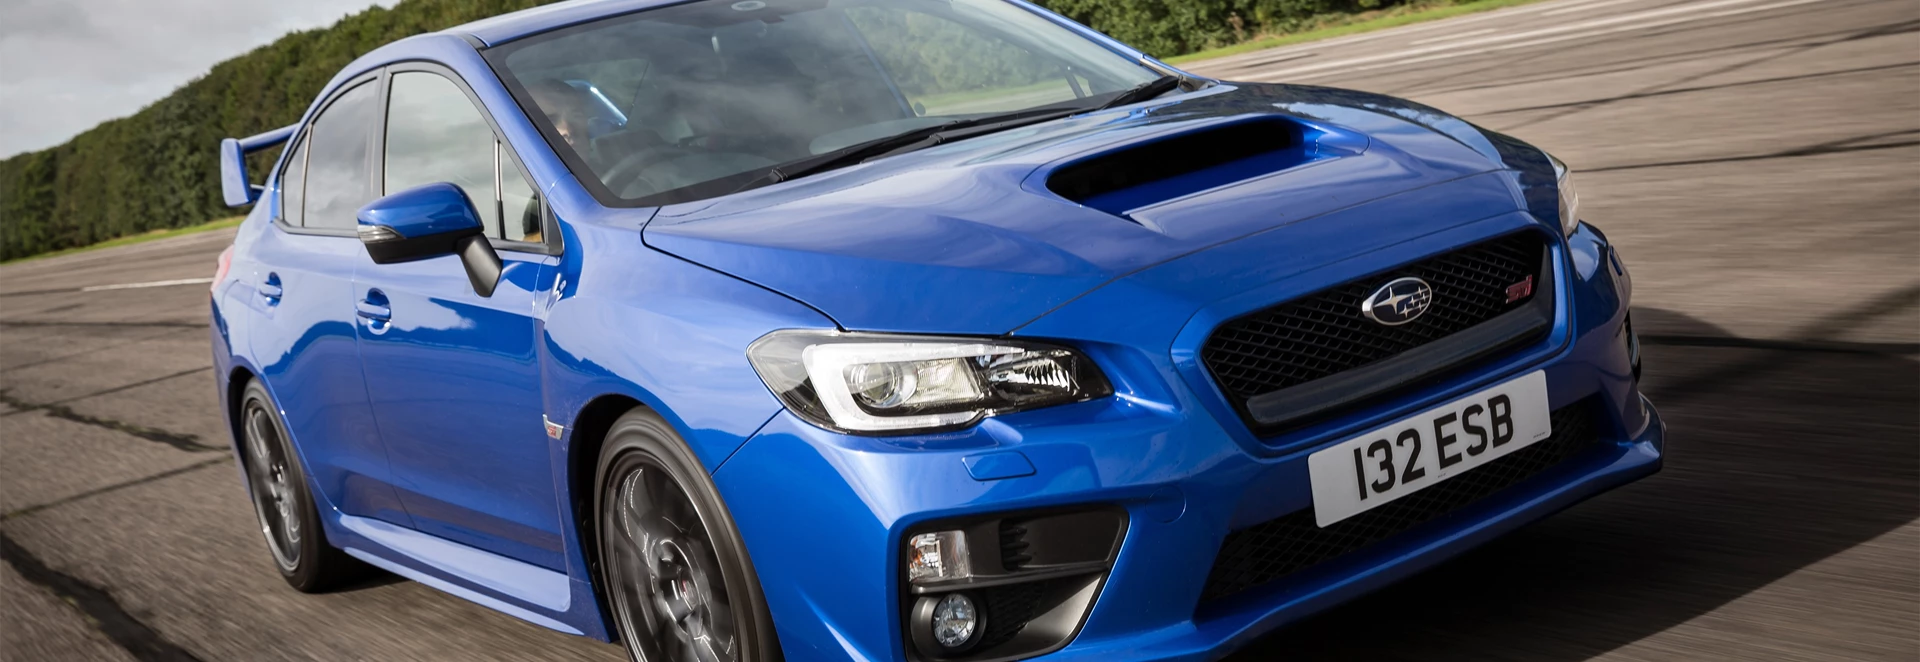 The Subaru WRX is the real star of Edgar Wright’s new ‘Baby Driver’ 